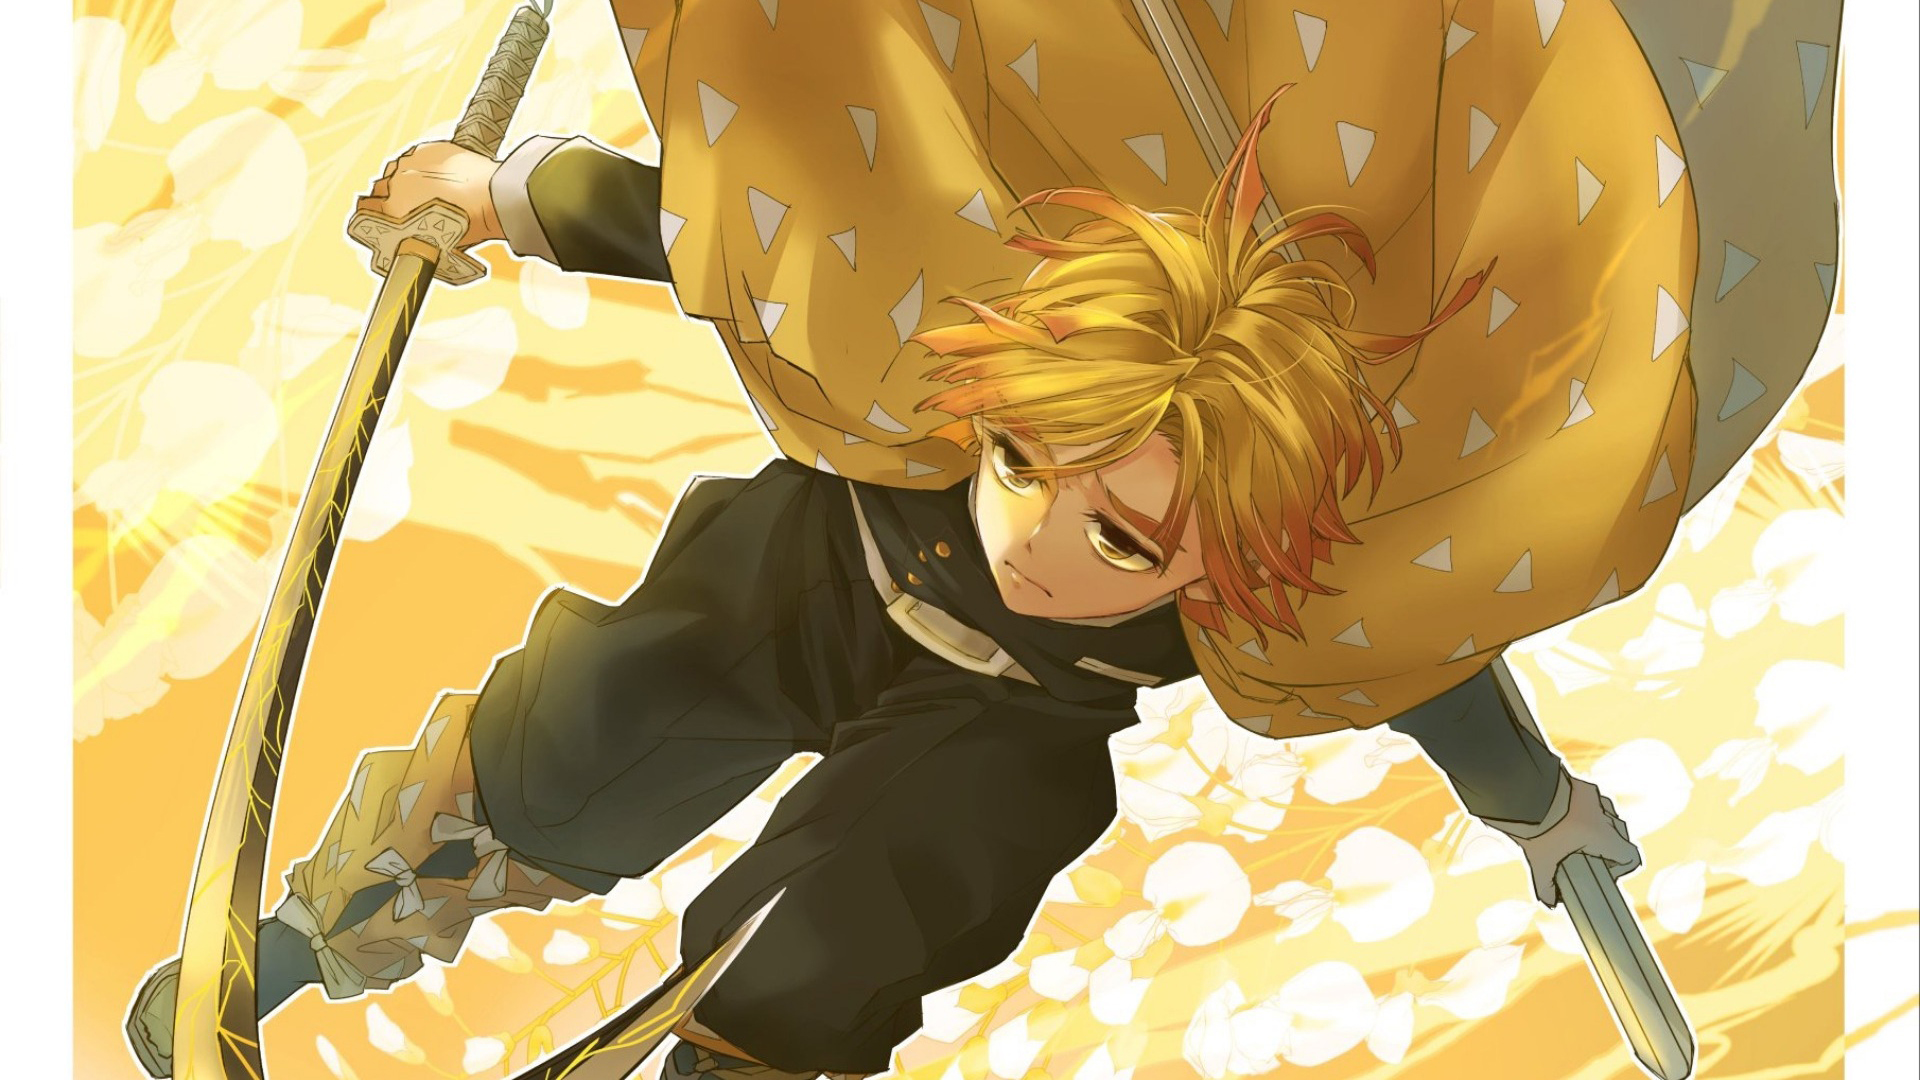 Demon Slayer Zenitsu Agatsuma With Sword And Yellow Scarf On Back With Wallpaper Of Yellow Abstract 2K Anime